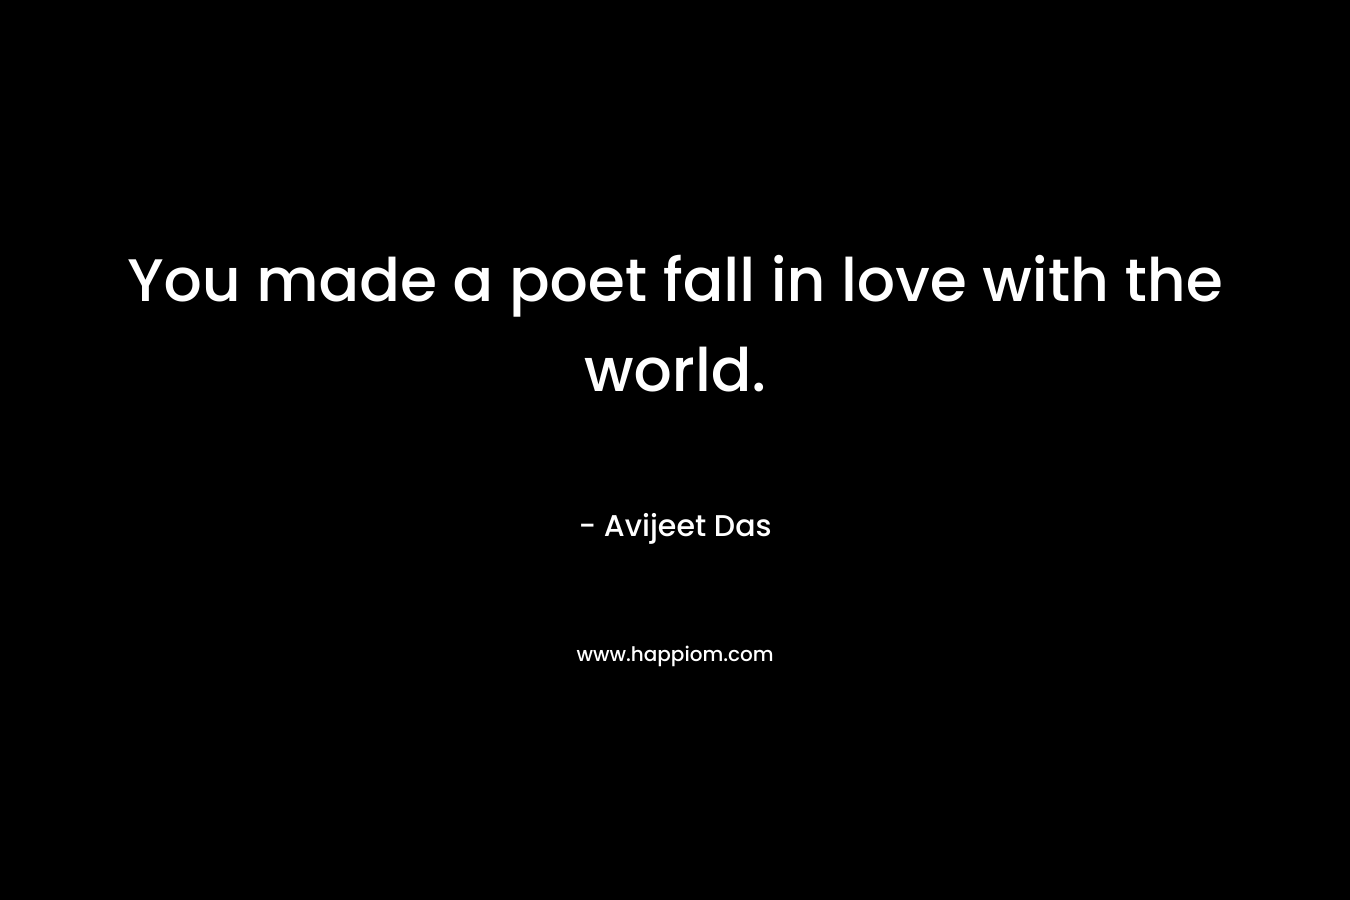 You made a poet fall in love with the world.